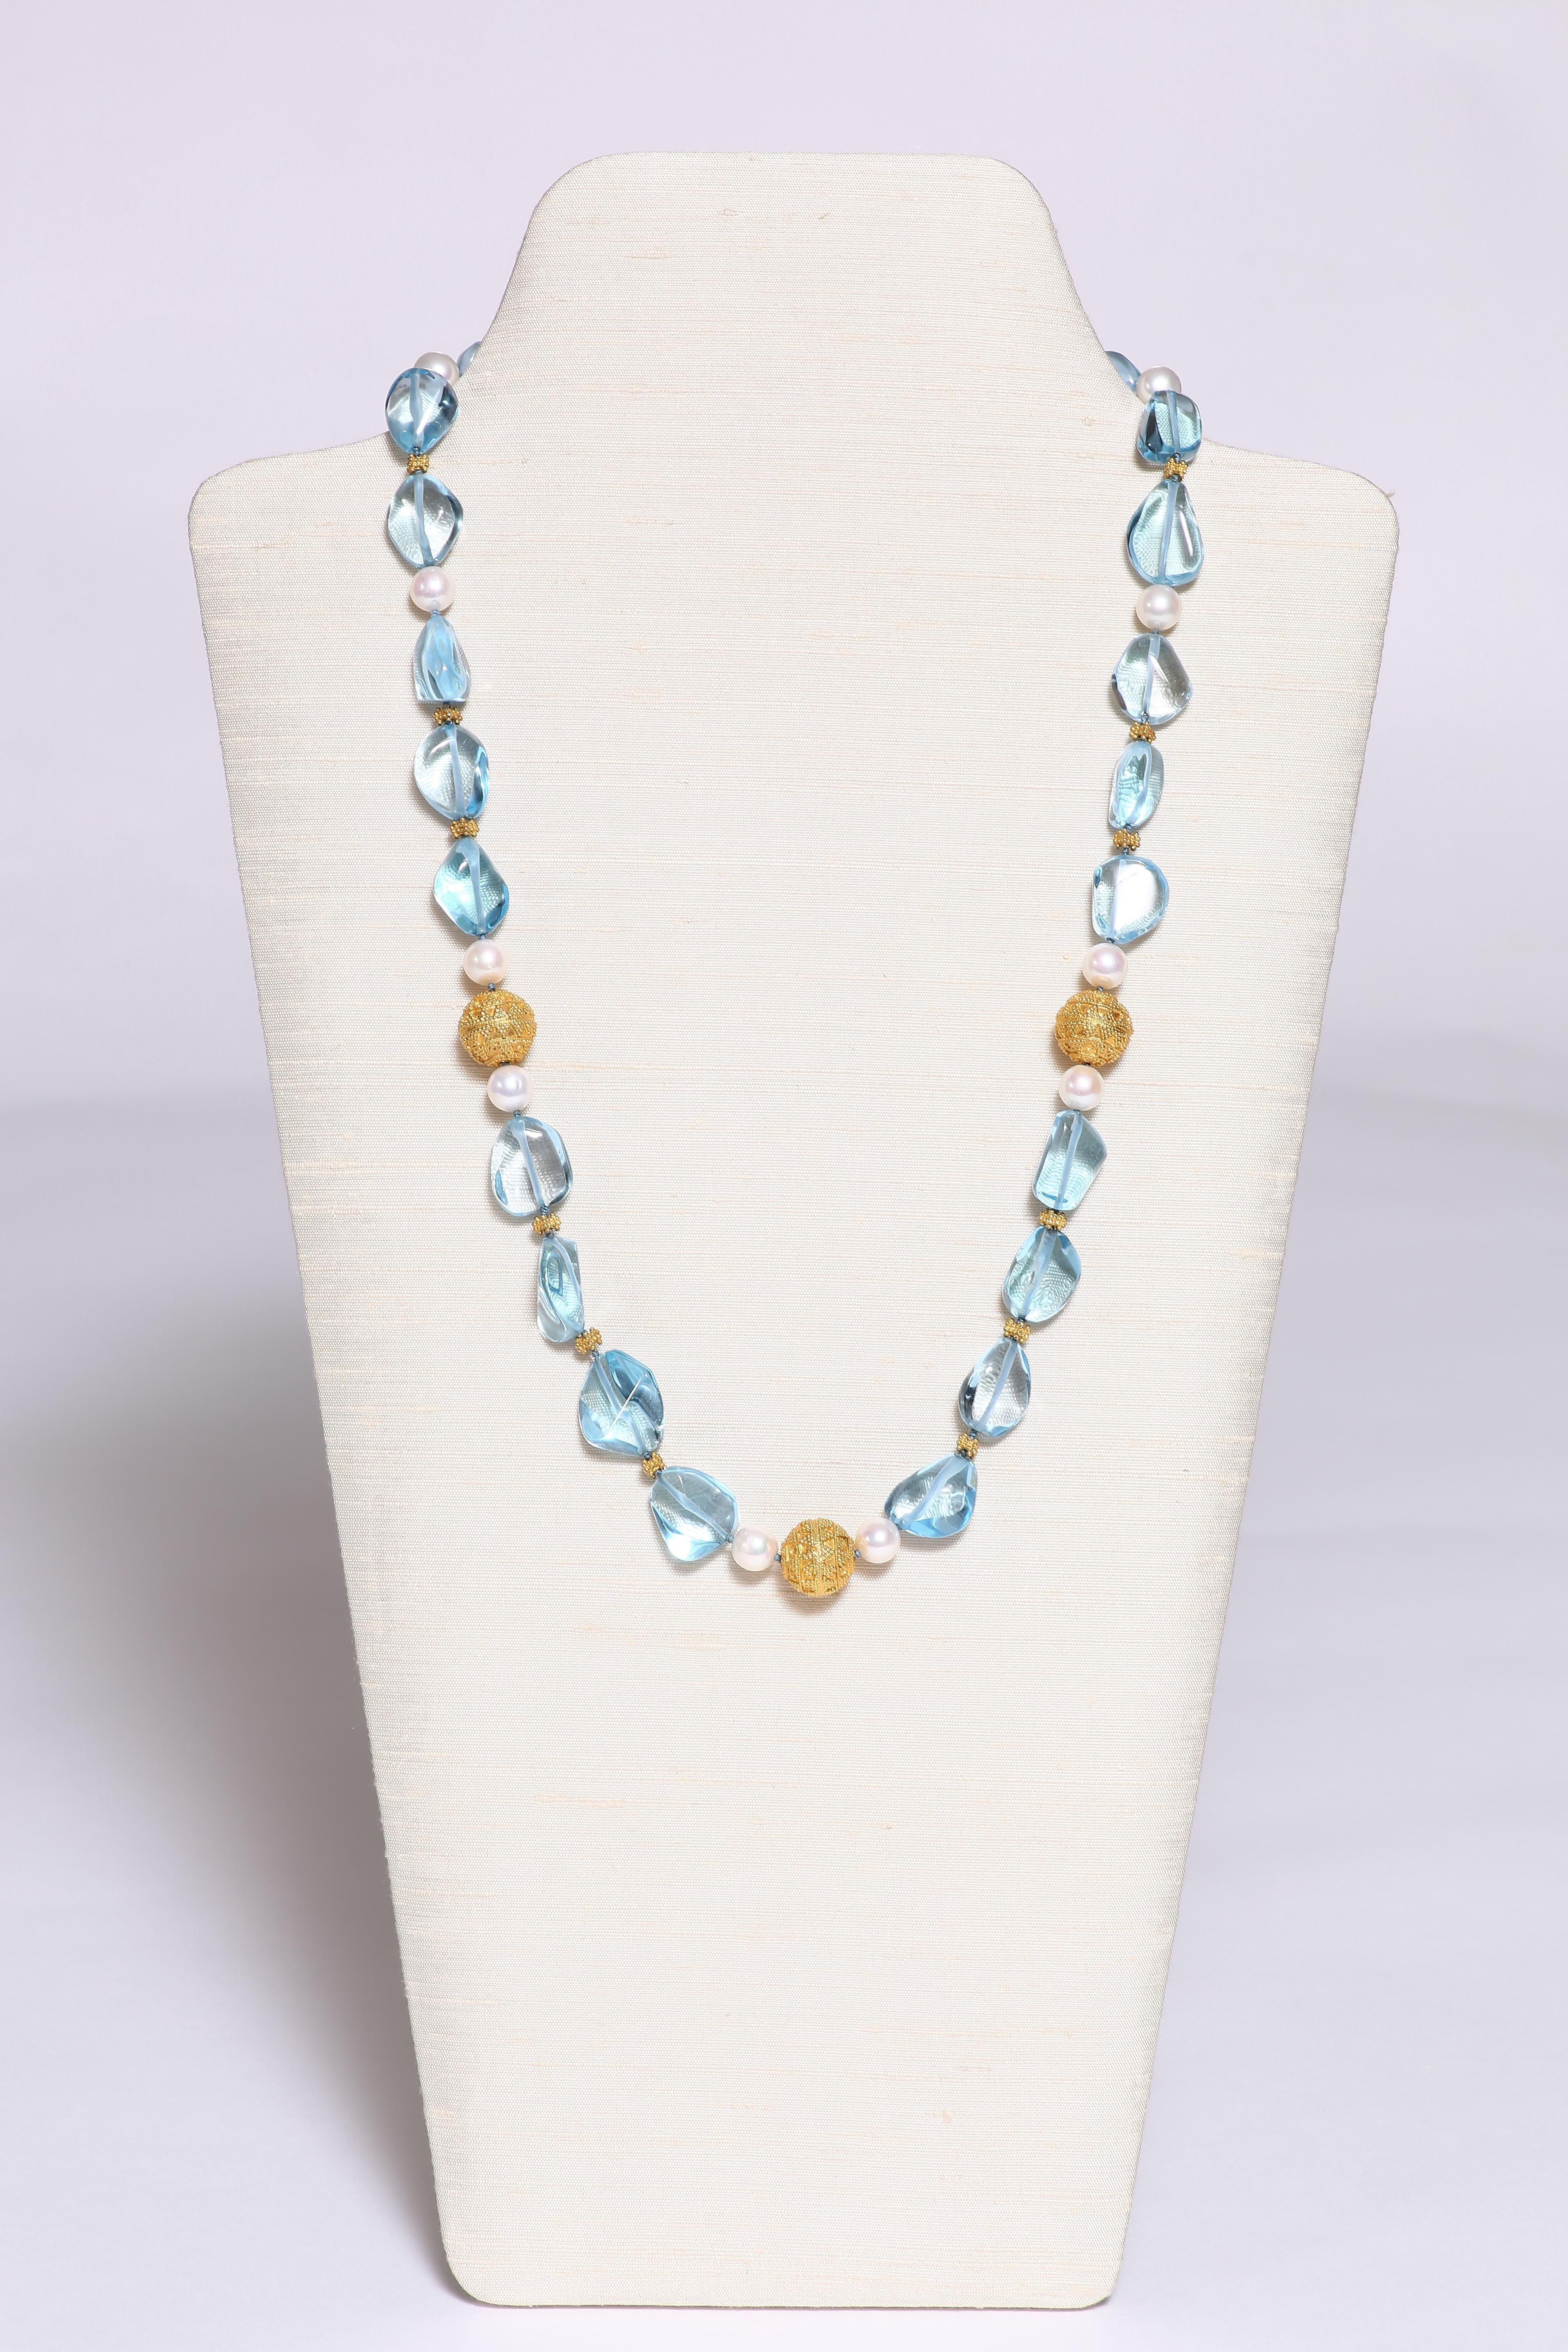 An exquisite necklace with clear blue topaz, round gold beads and freshwater peals. The bright clear topaz colouring is exquisite and makes a stunning summer necklace. 25